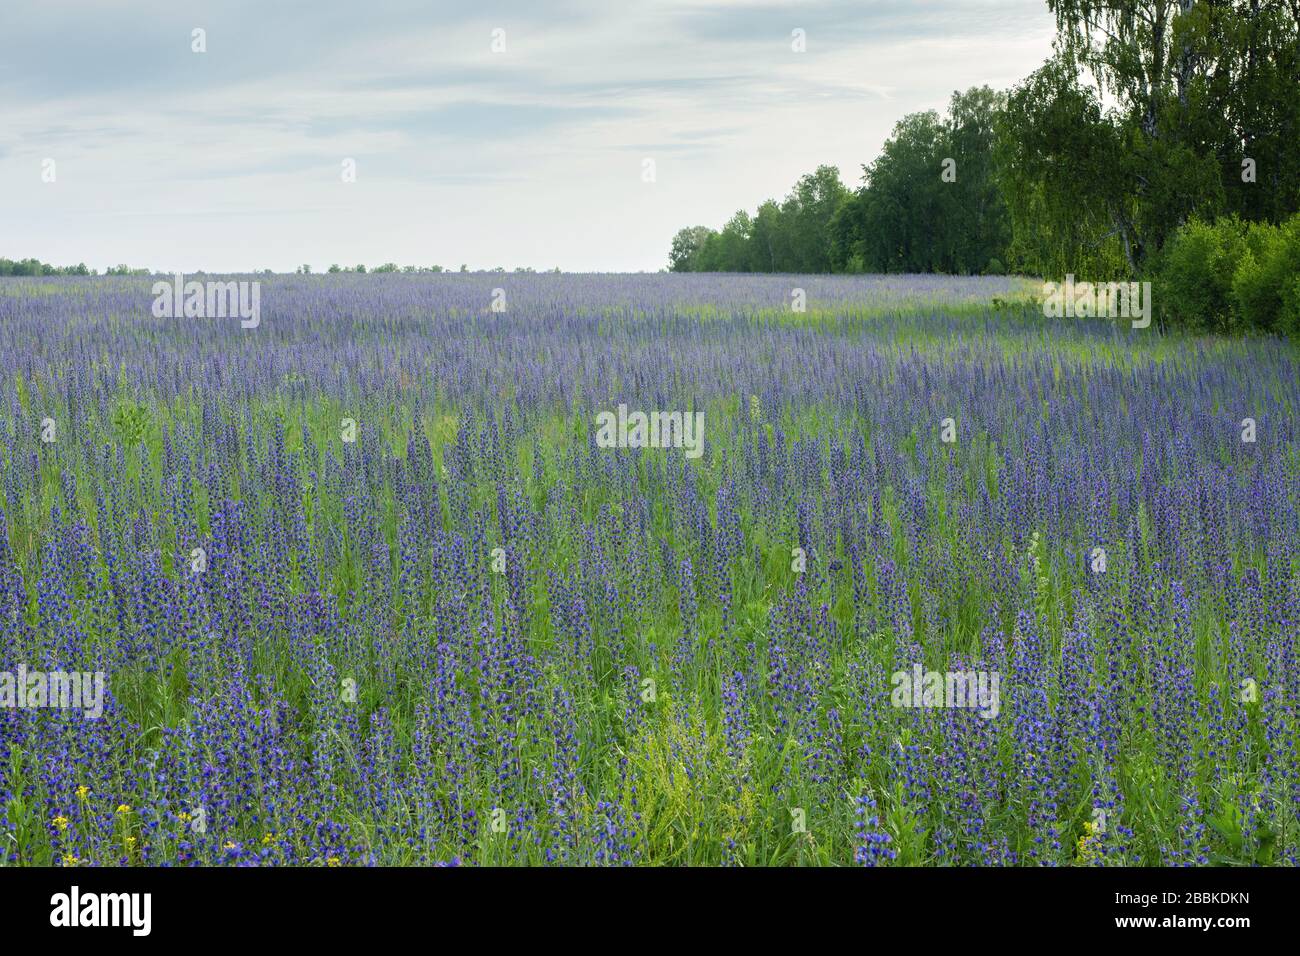 Field of lavender, blue and purple hyssop, hyssopus officinalis flowers in summer under blue cloudy sky. Nature, floral background, wallpaper. Splendi Stock Photo